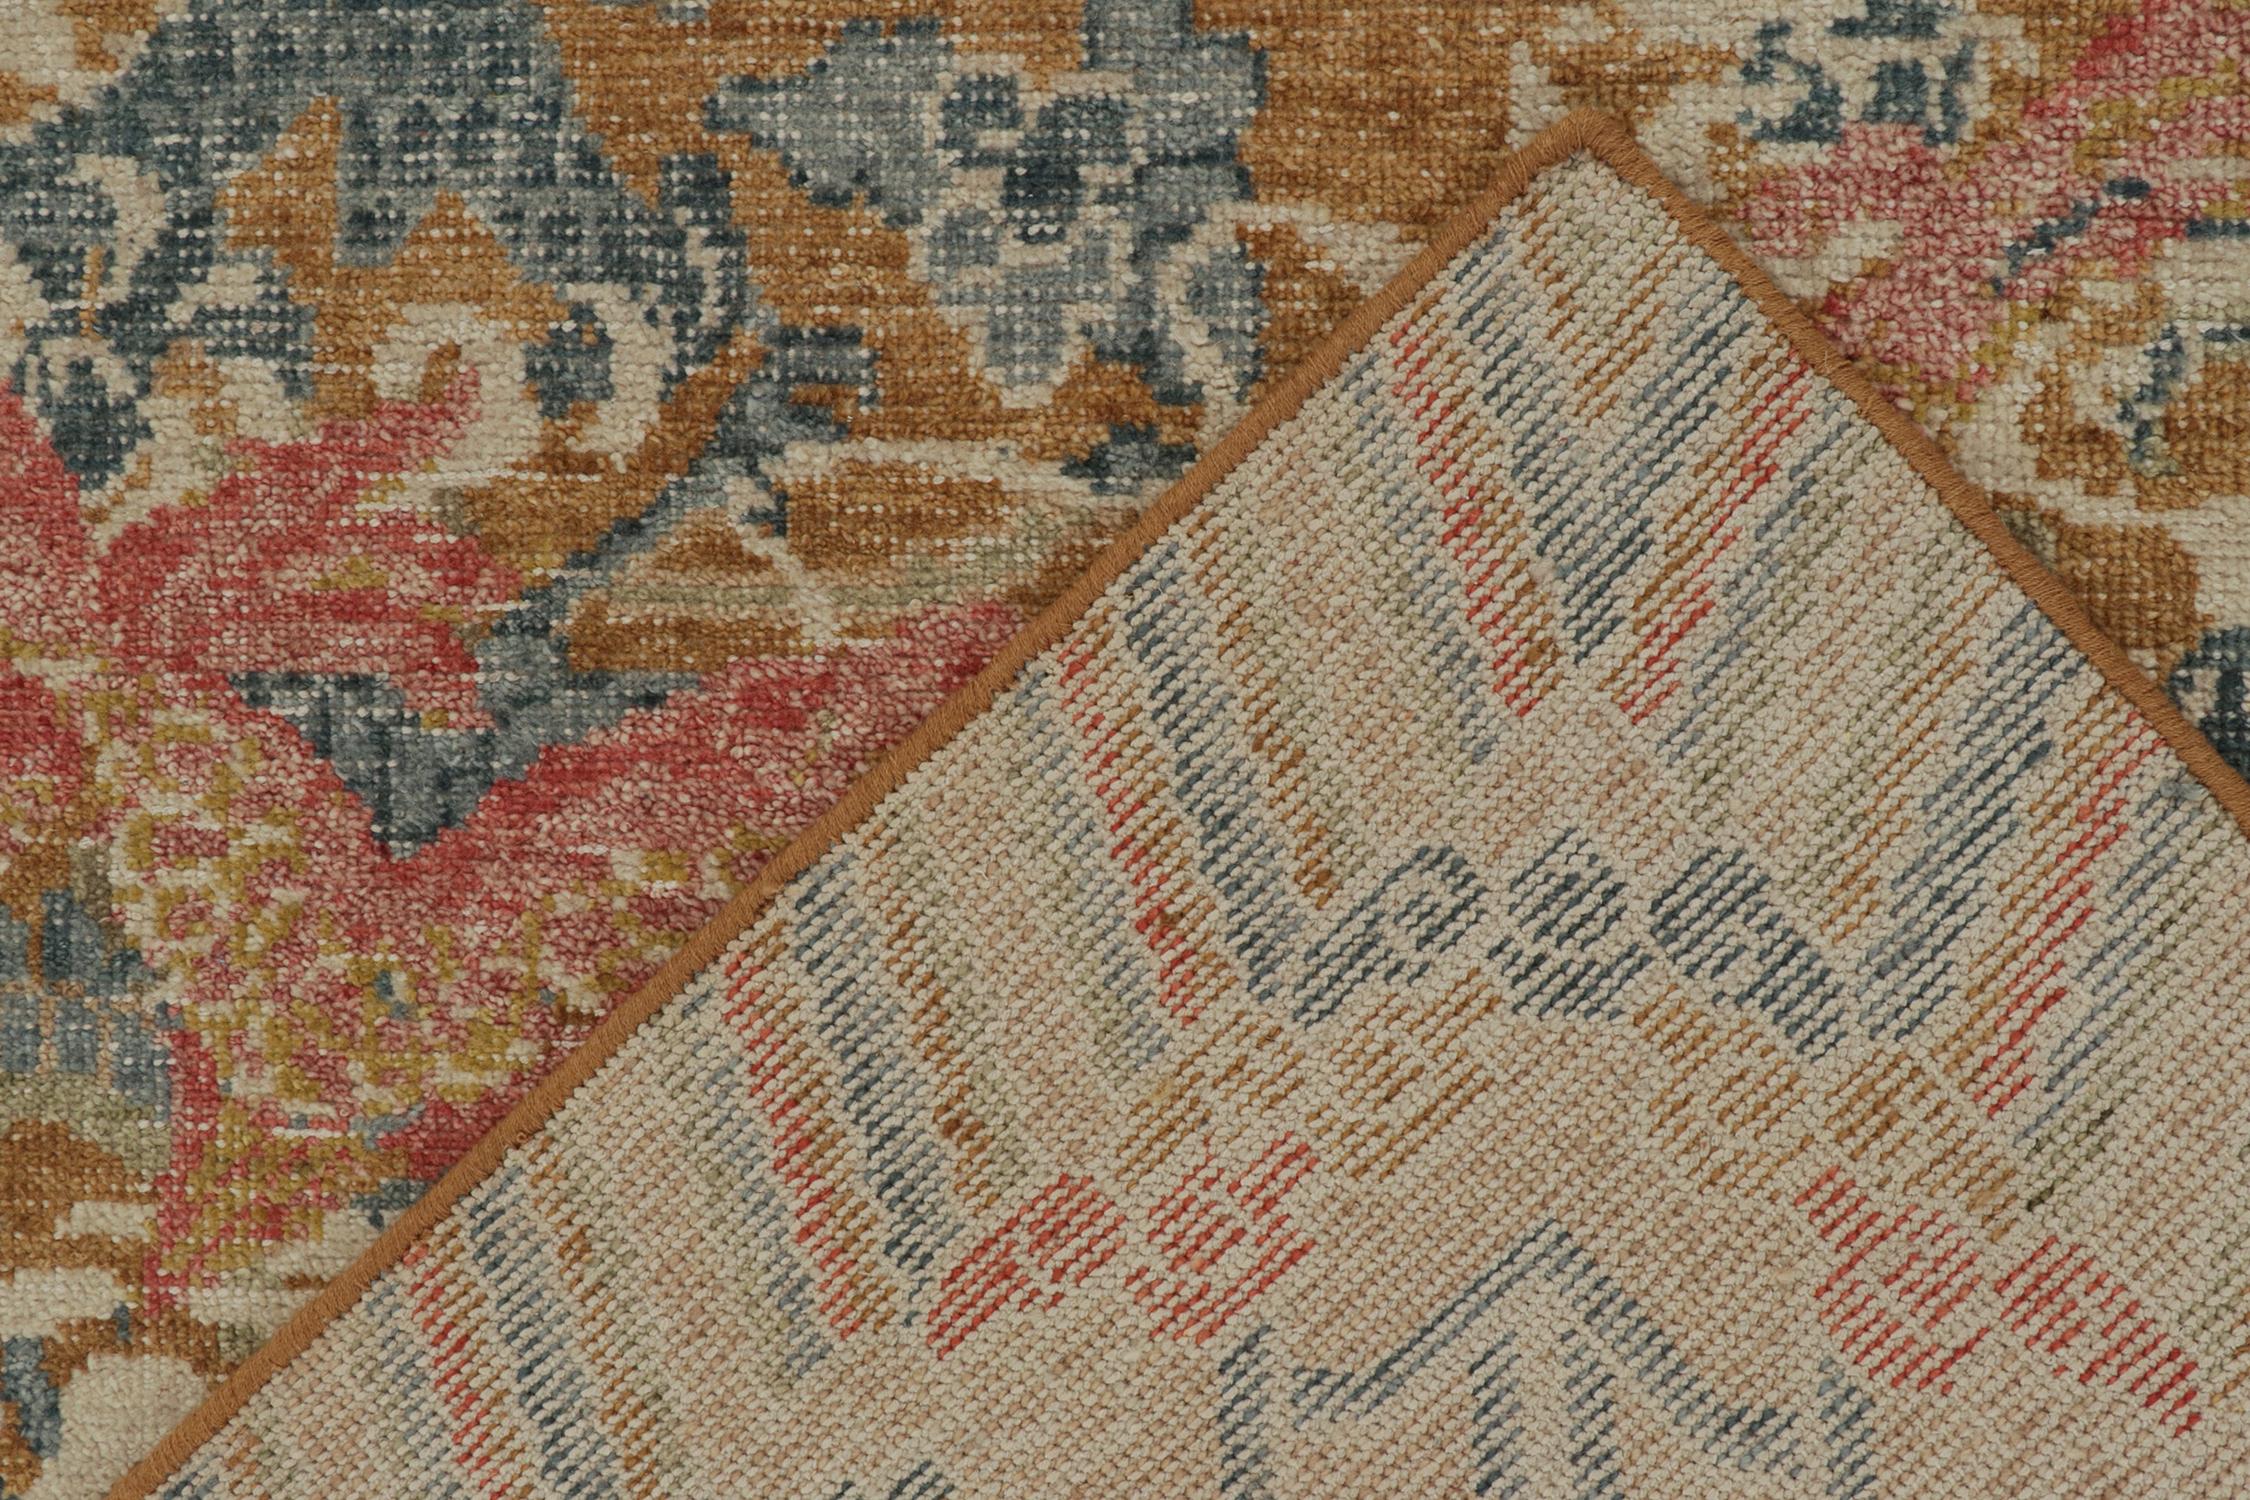 Wool Rug & Kilim’s Distressed Style Dragon Rug in Ochre, Blue and Red Pictorial For Sale